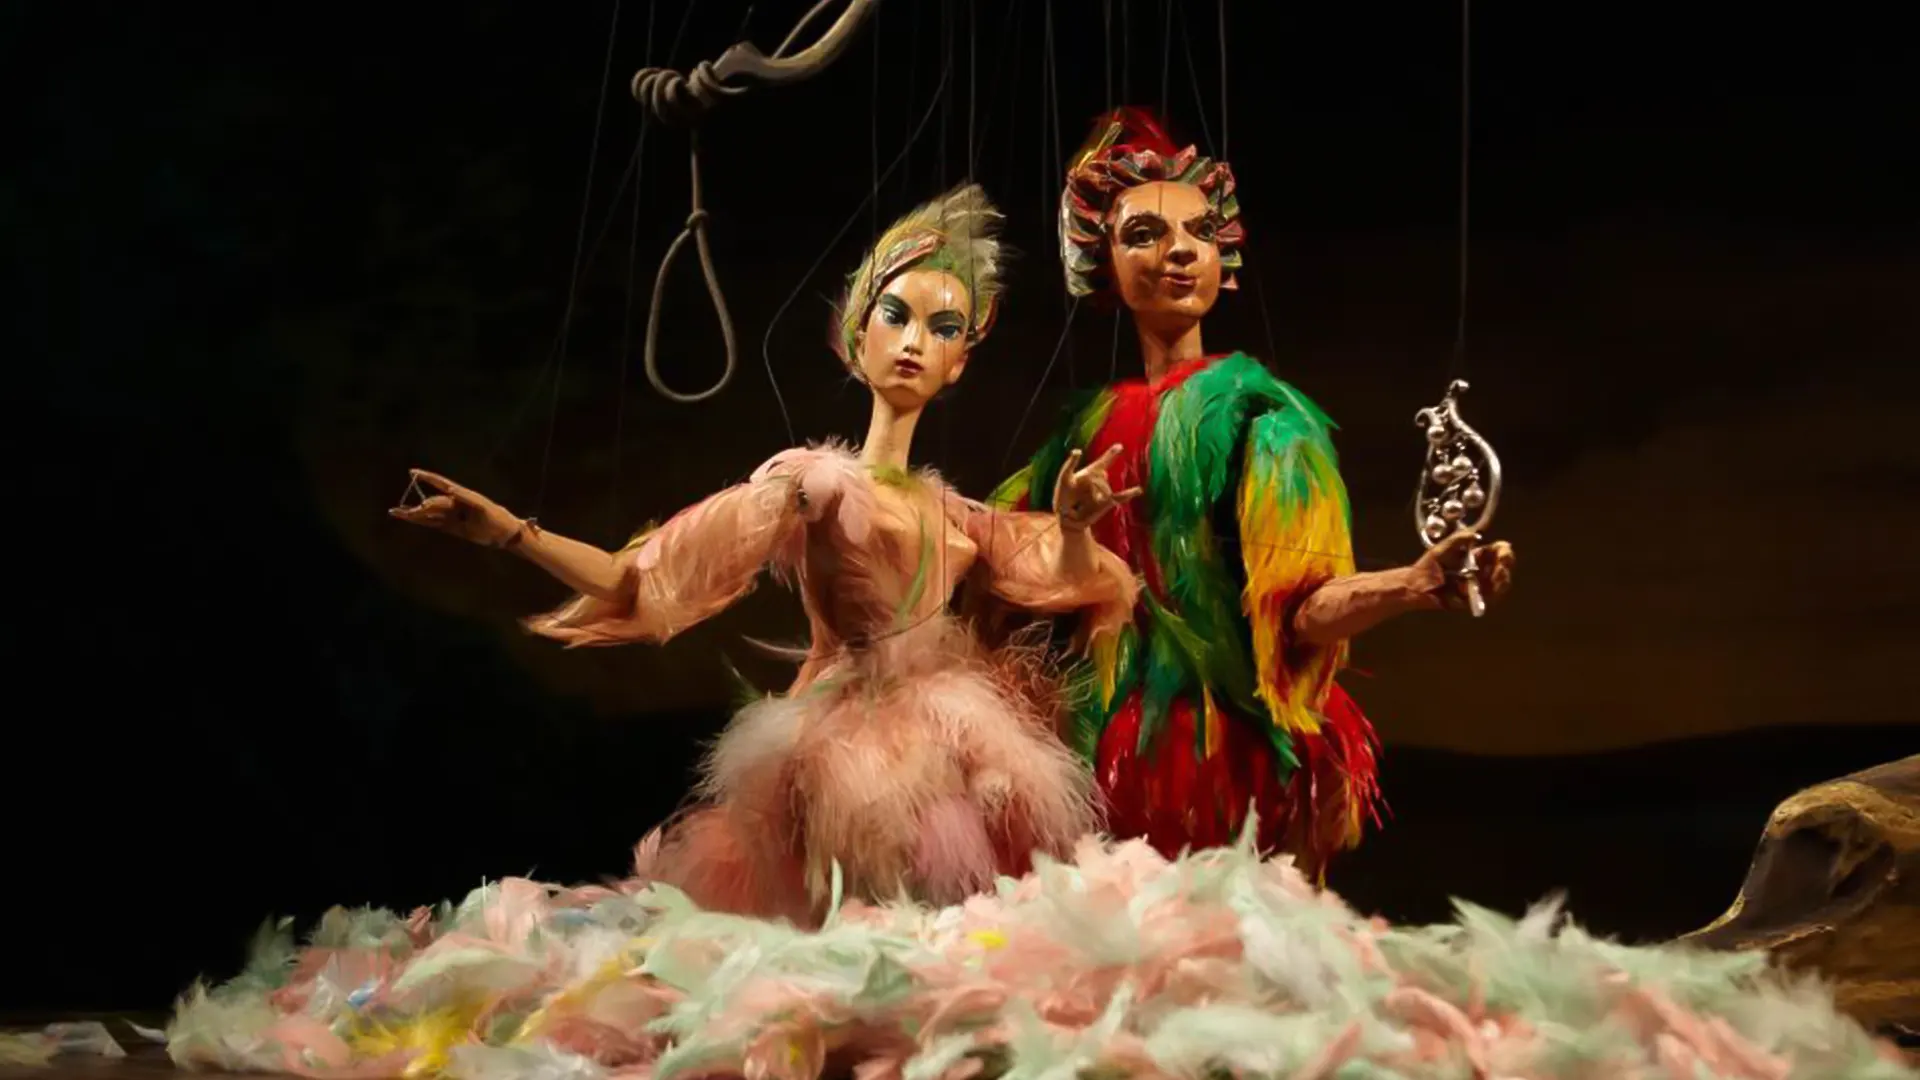 Puppetry Highlights Show at the Marionettentheater